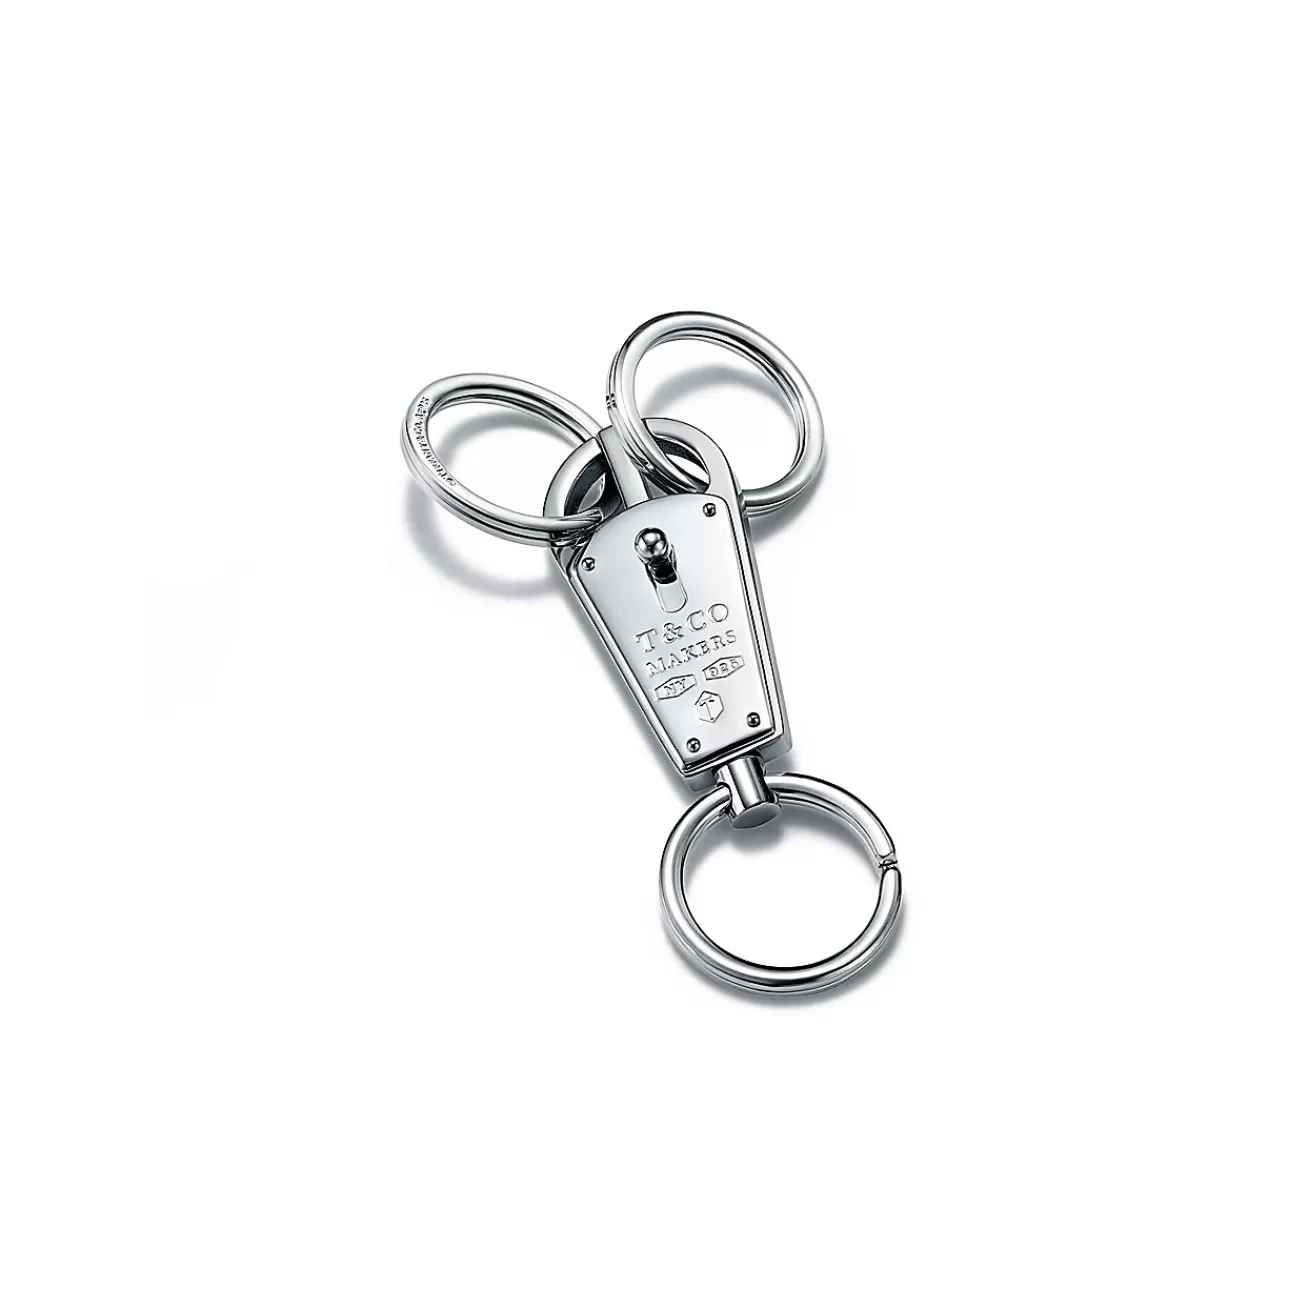 Tiffany & Co. Tiffany 1837 Makers valet key ring in sterling silver and stainless steel. | ^ Key Rings | Accessories